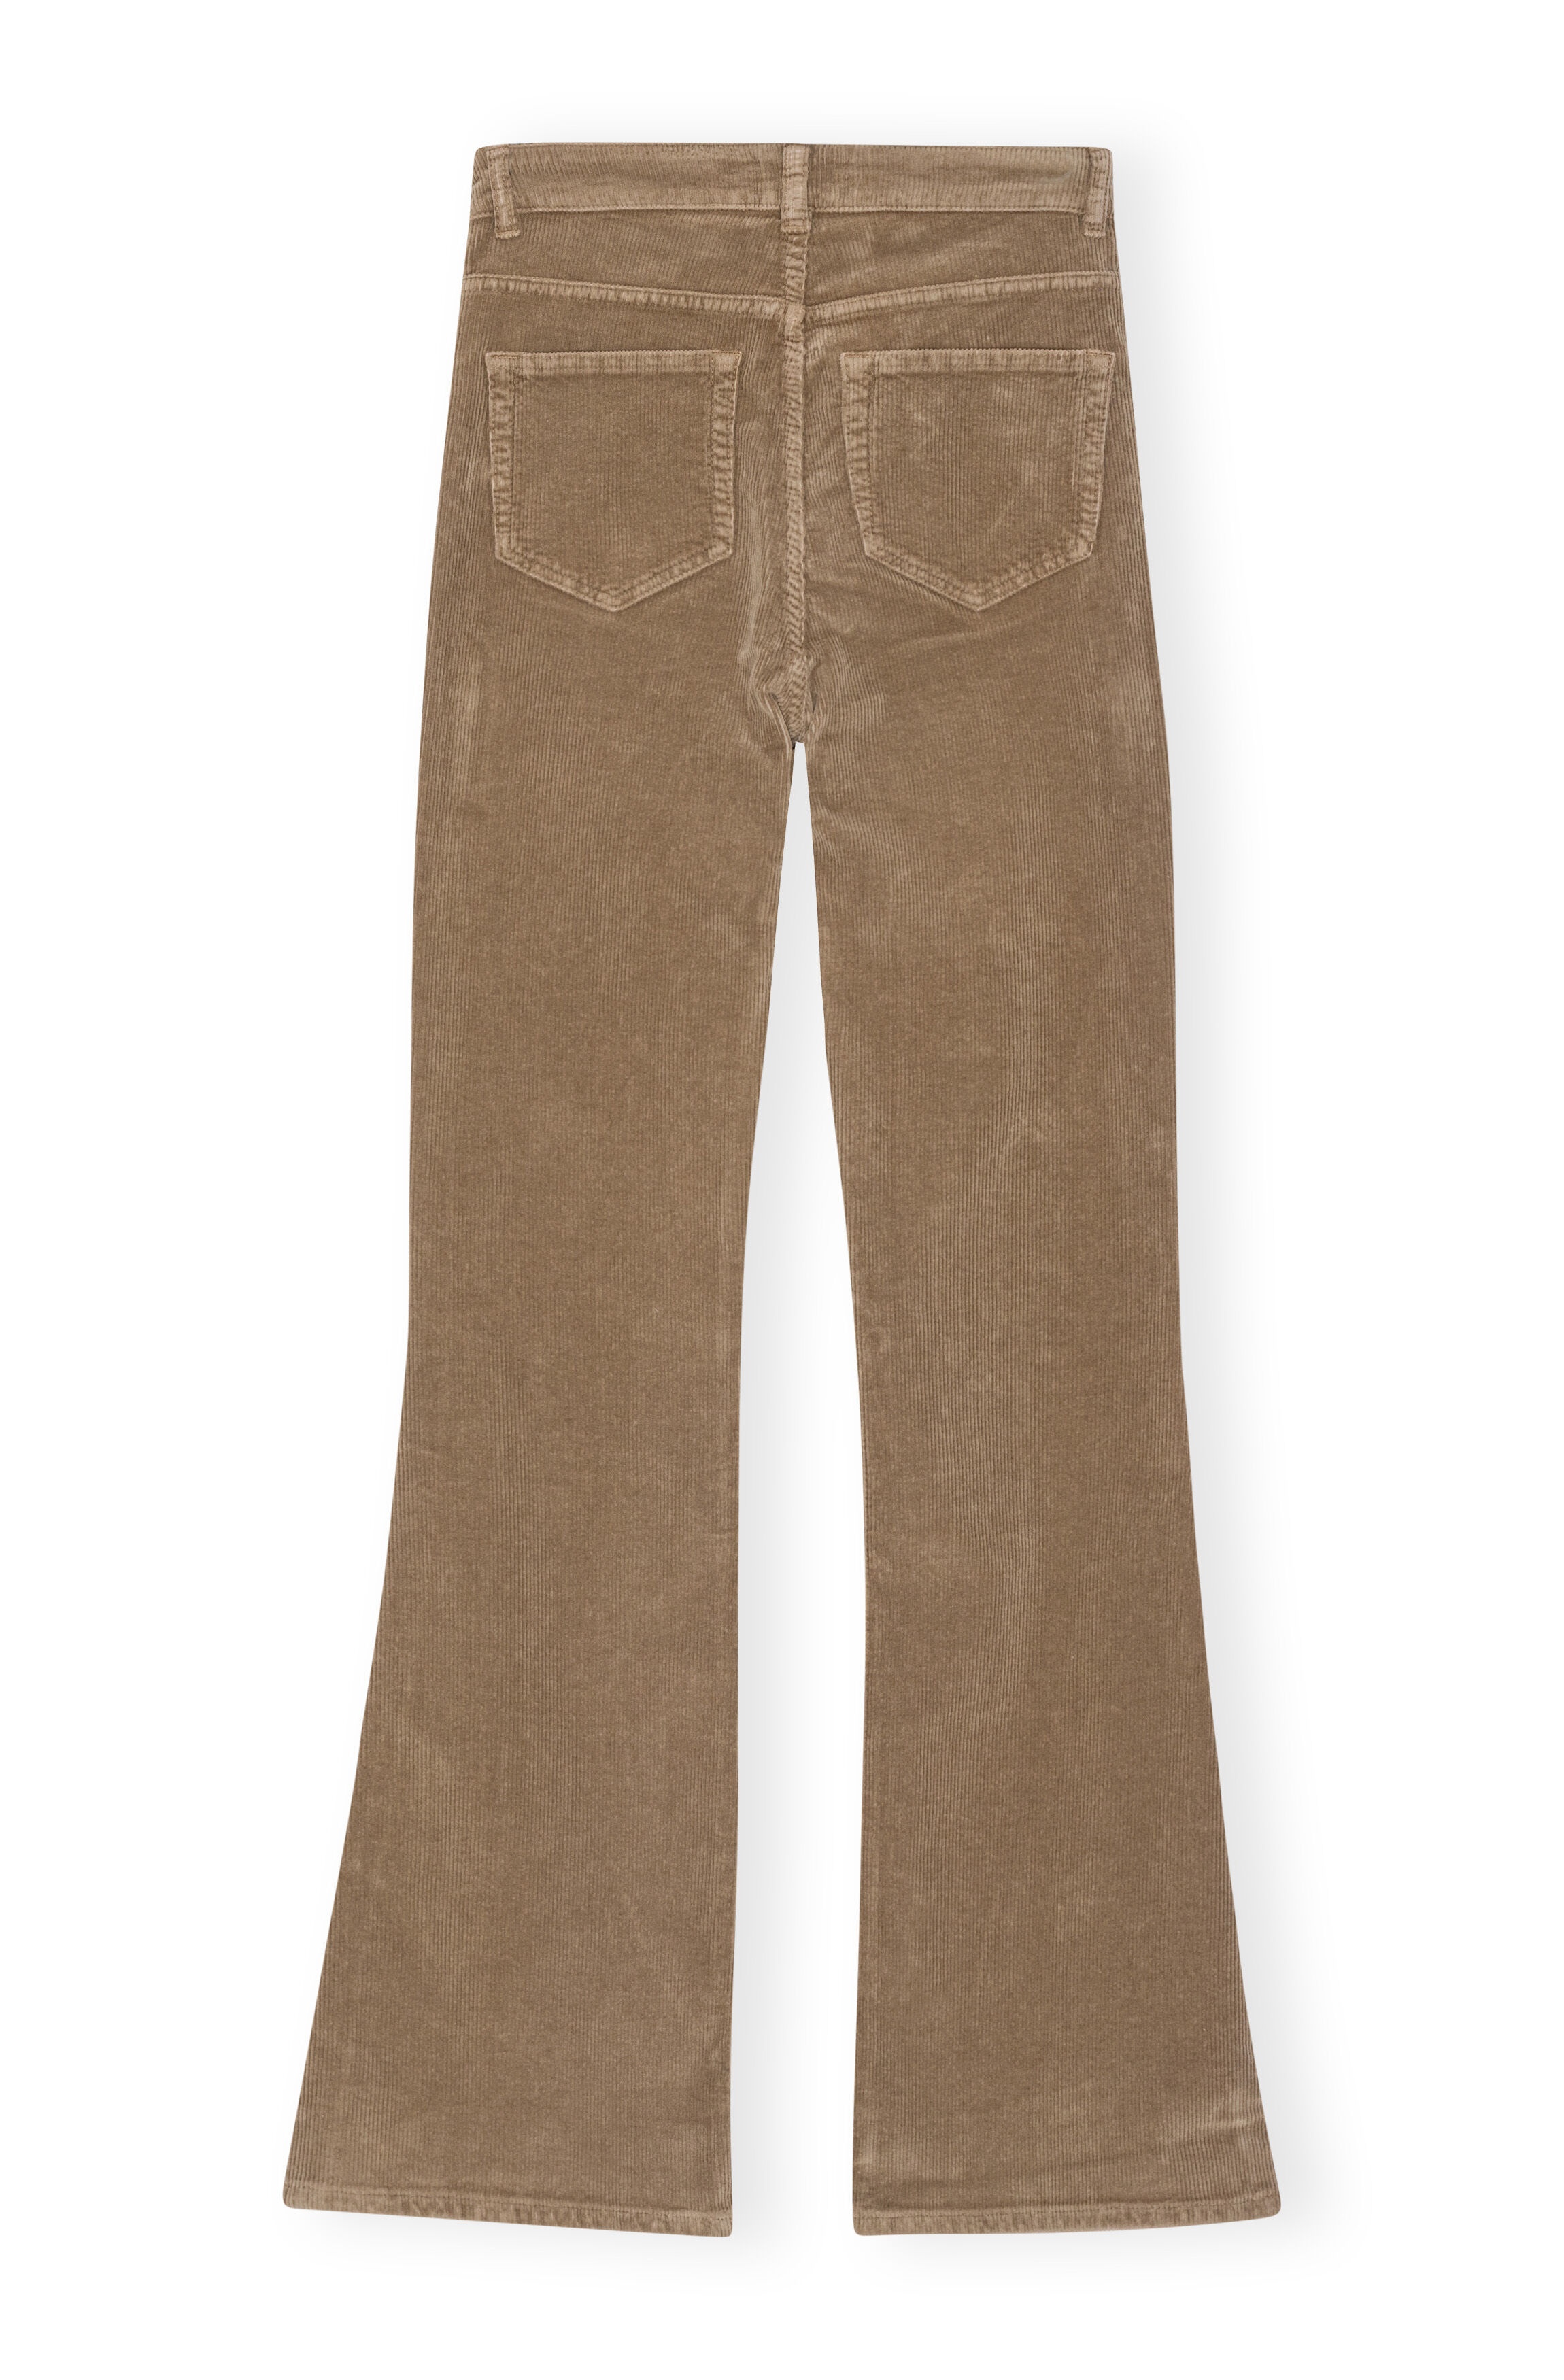 BROWN WASHED CORDUROY IRY TROUSERS - 2